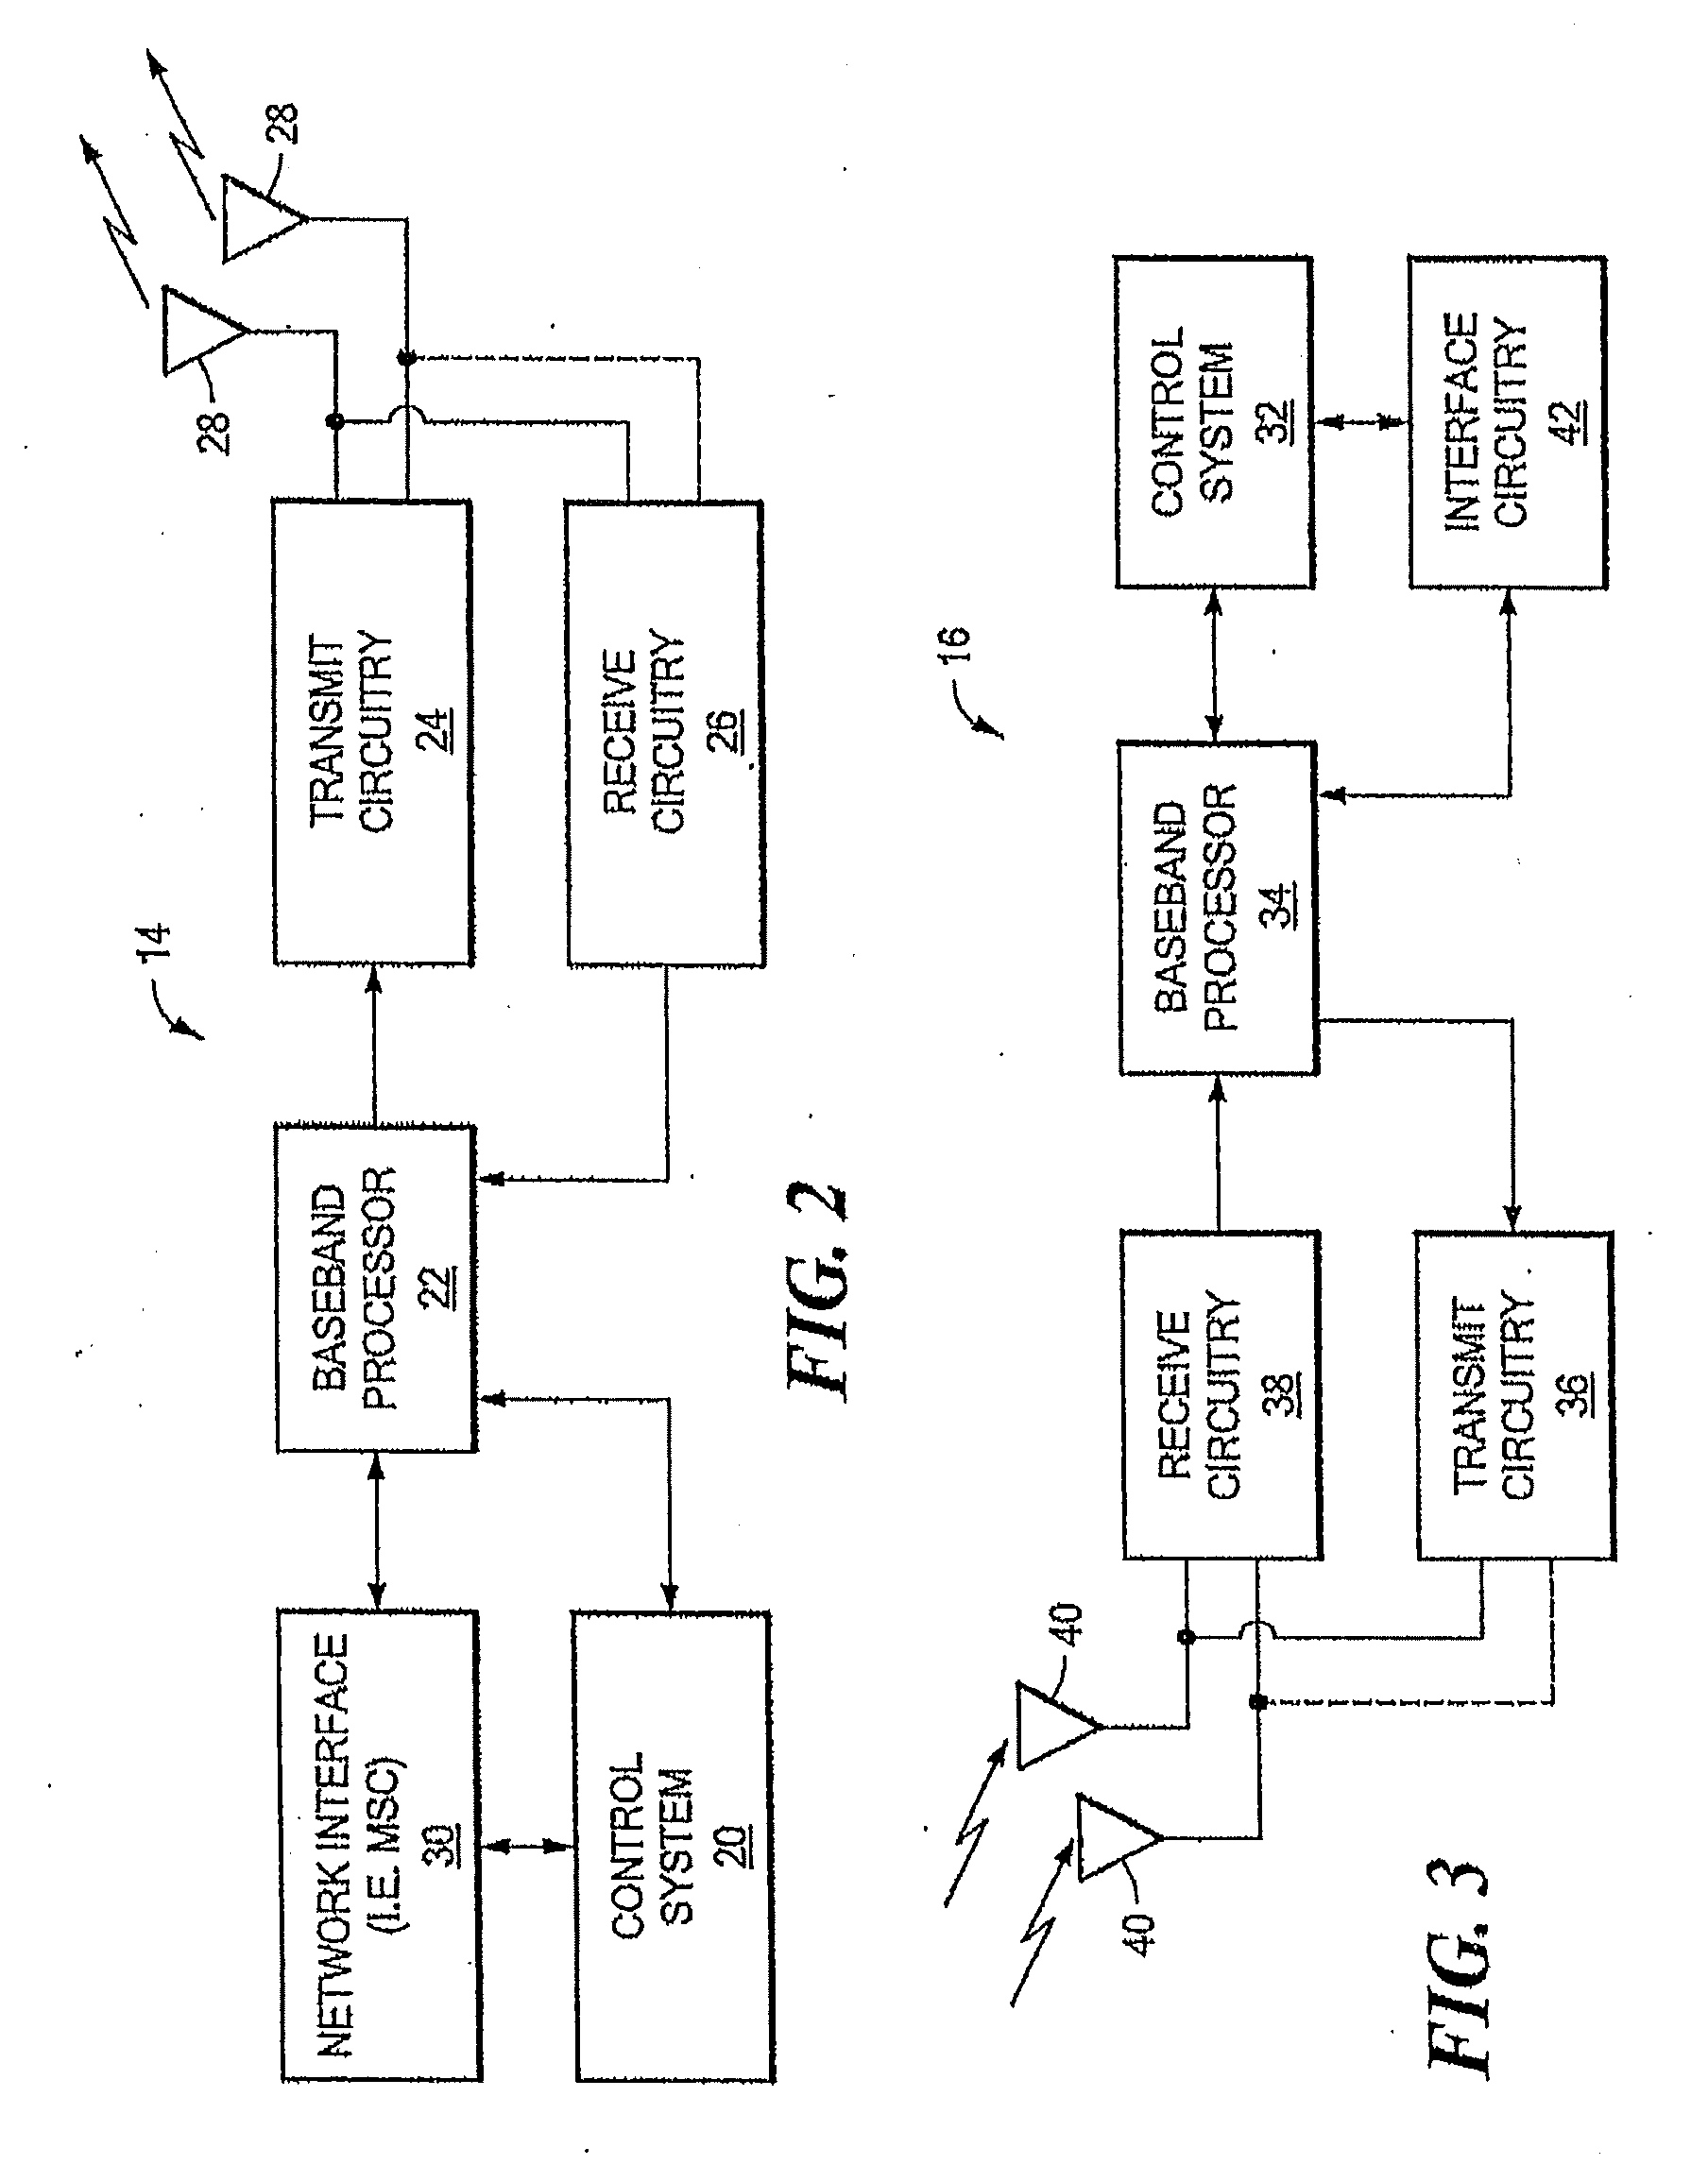 Method and System for Wireless Communication in Multiple Operating Environments